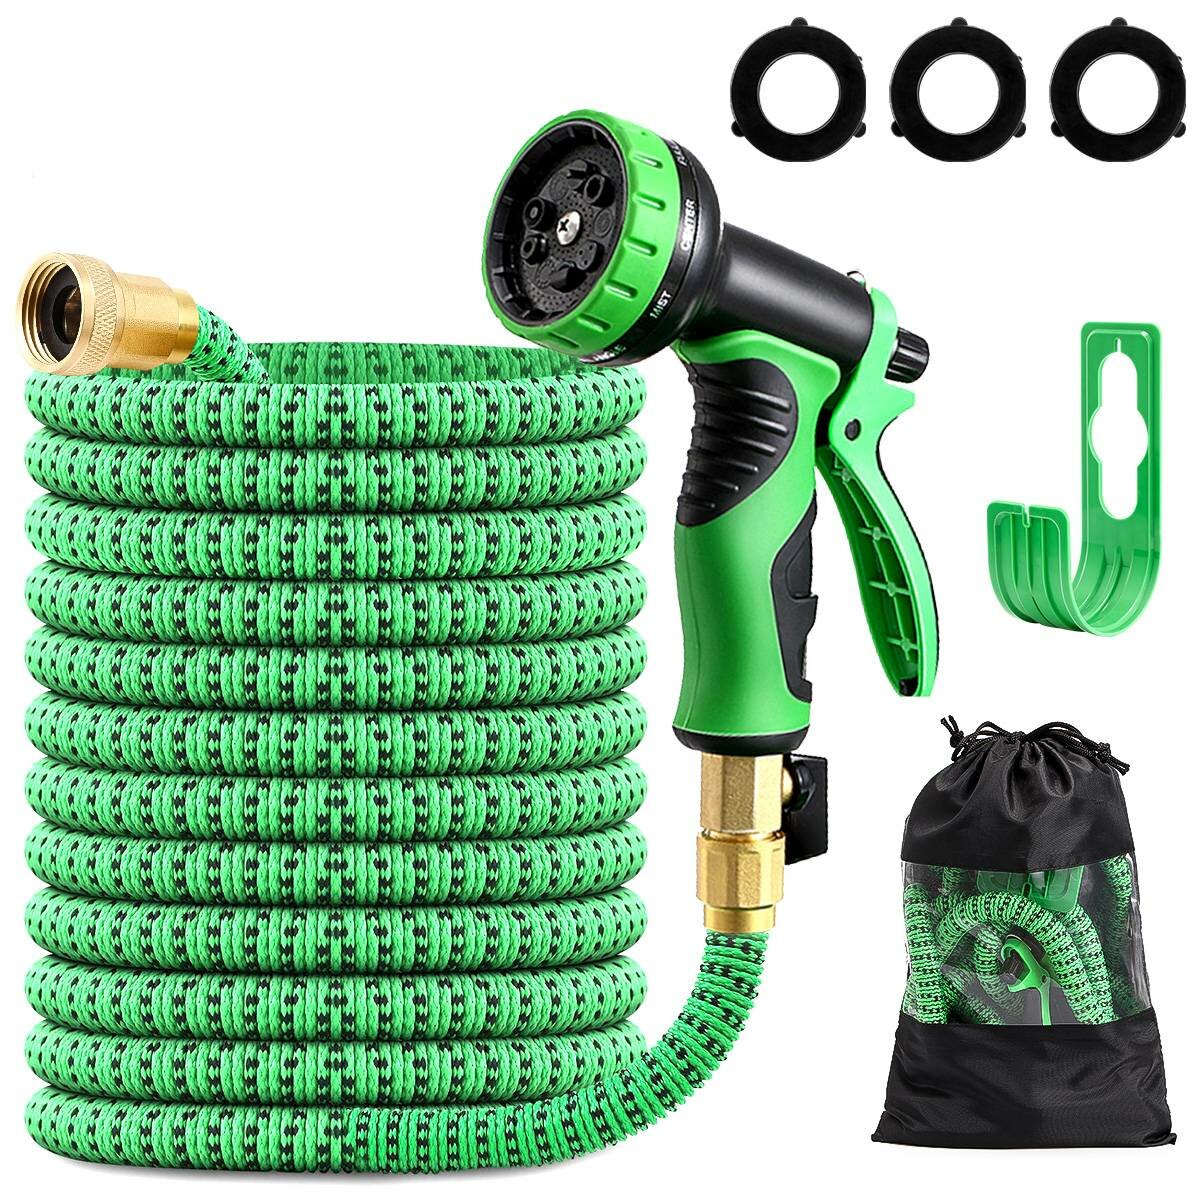 

Garden Hose 15m Set Flexible Pipe Expandable Magic Hose with 9 Functions Spray Gun for High-Pressure Car Wash